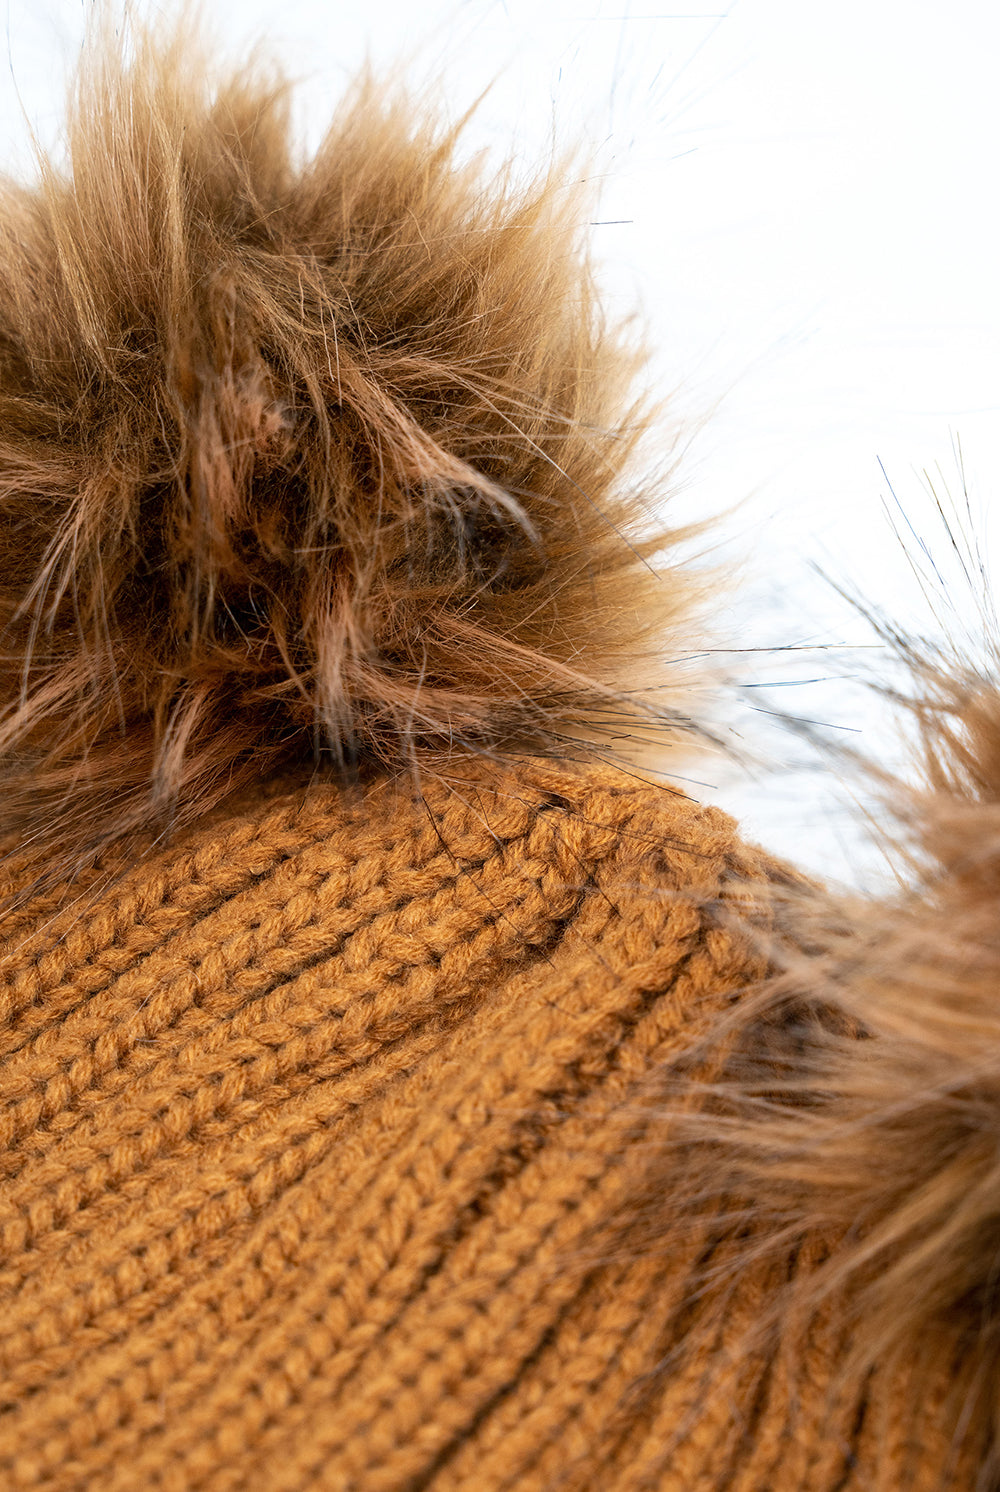 My Accessories London Knitted Double Fur Pom Beanie in Brown | Knitted | Winter Accessories | Women | Women's | Accessories | Accessory | Fluffy | Vegan | Ski  | Warm 